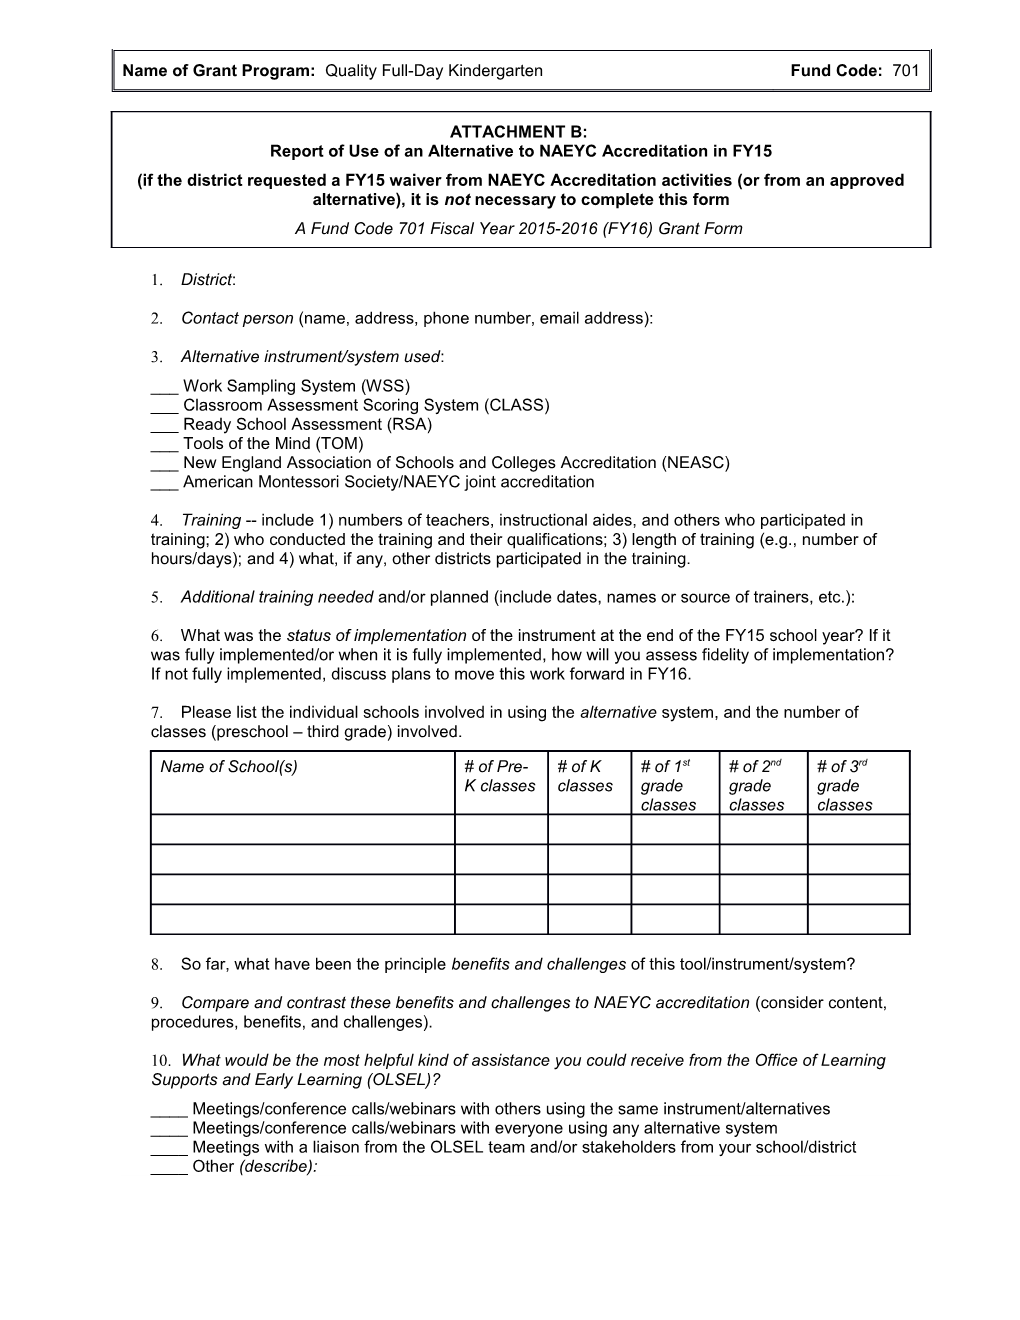 FY2016 Fund Code 701 Quality Full-Day Kindergarten Grant Attachment B